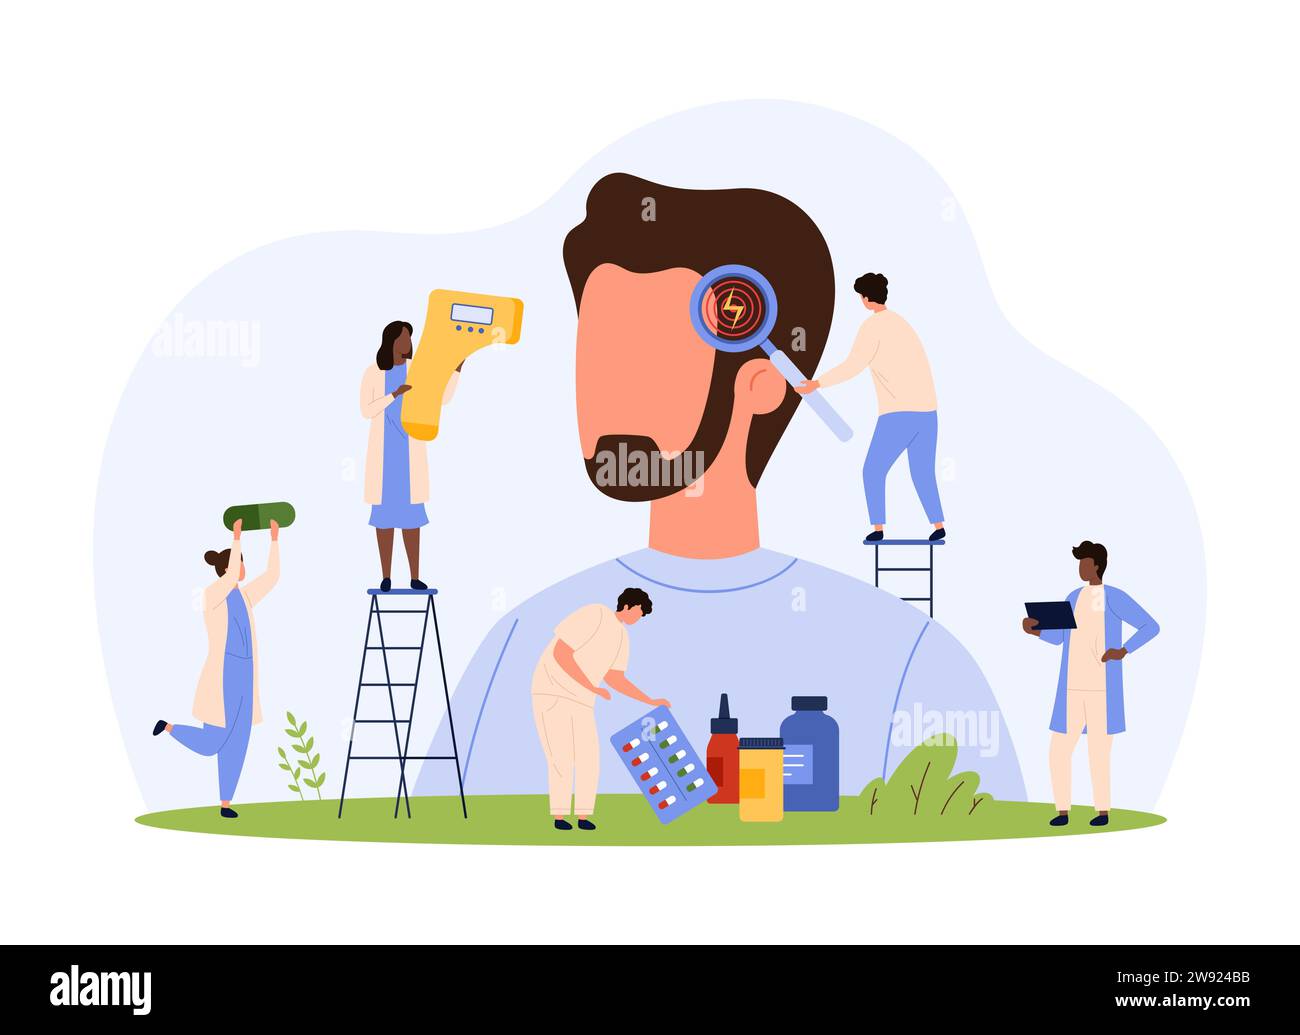 Diagnosis and treatment of flu, cold symptoms vector illustration. Cartoon tiny people check health of man with infrared thermometer and magnifying glass, diagnose high temperature, fever and headache Stock Vector